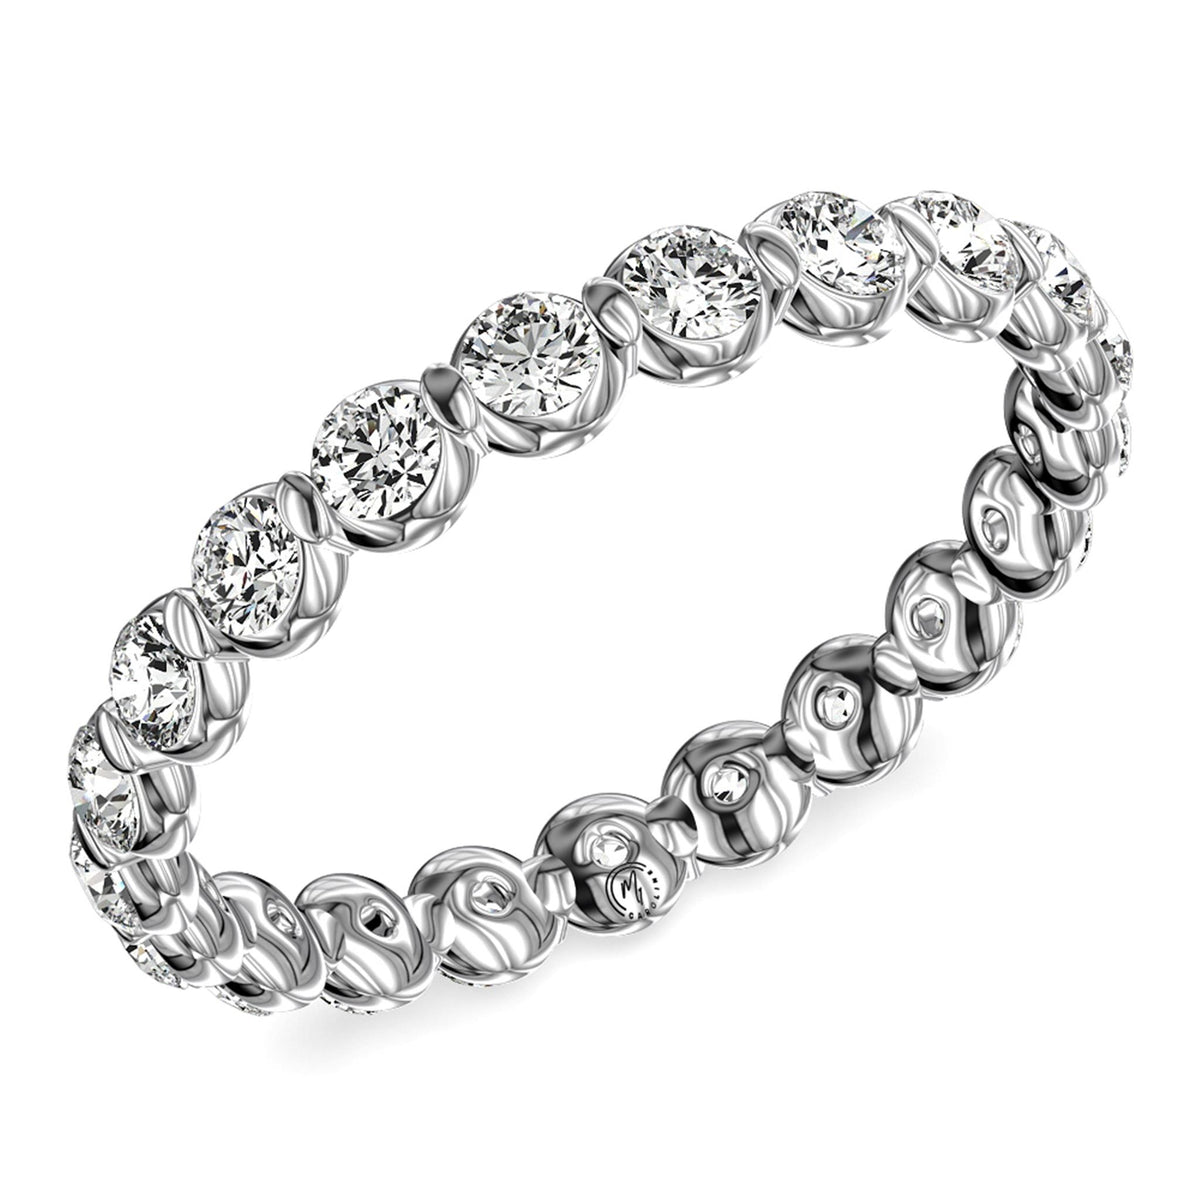 14Kt White Gold Eternity Wedding Ring With 0.60cttw Natural Diamonds